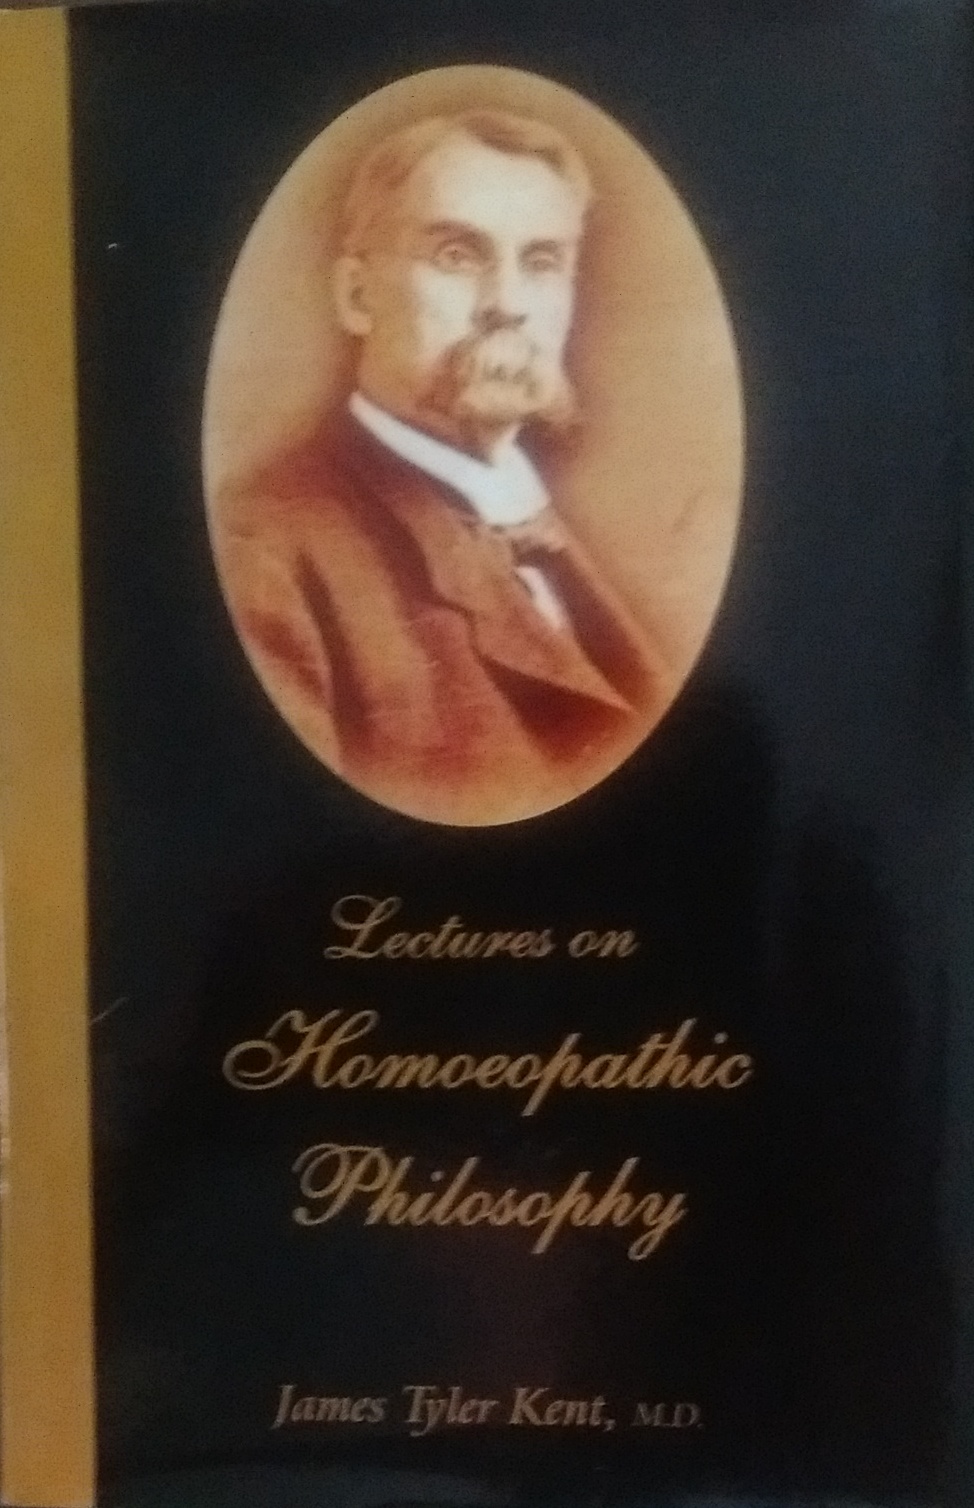 lectures-on-homoeopathic-philosophy